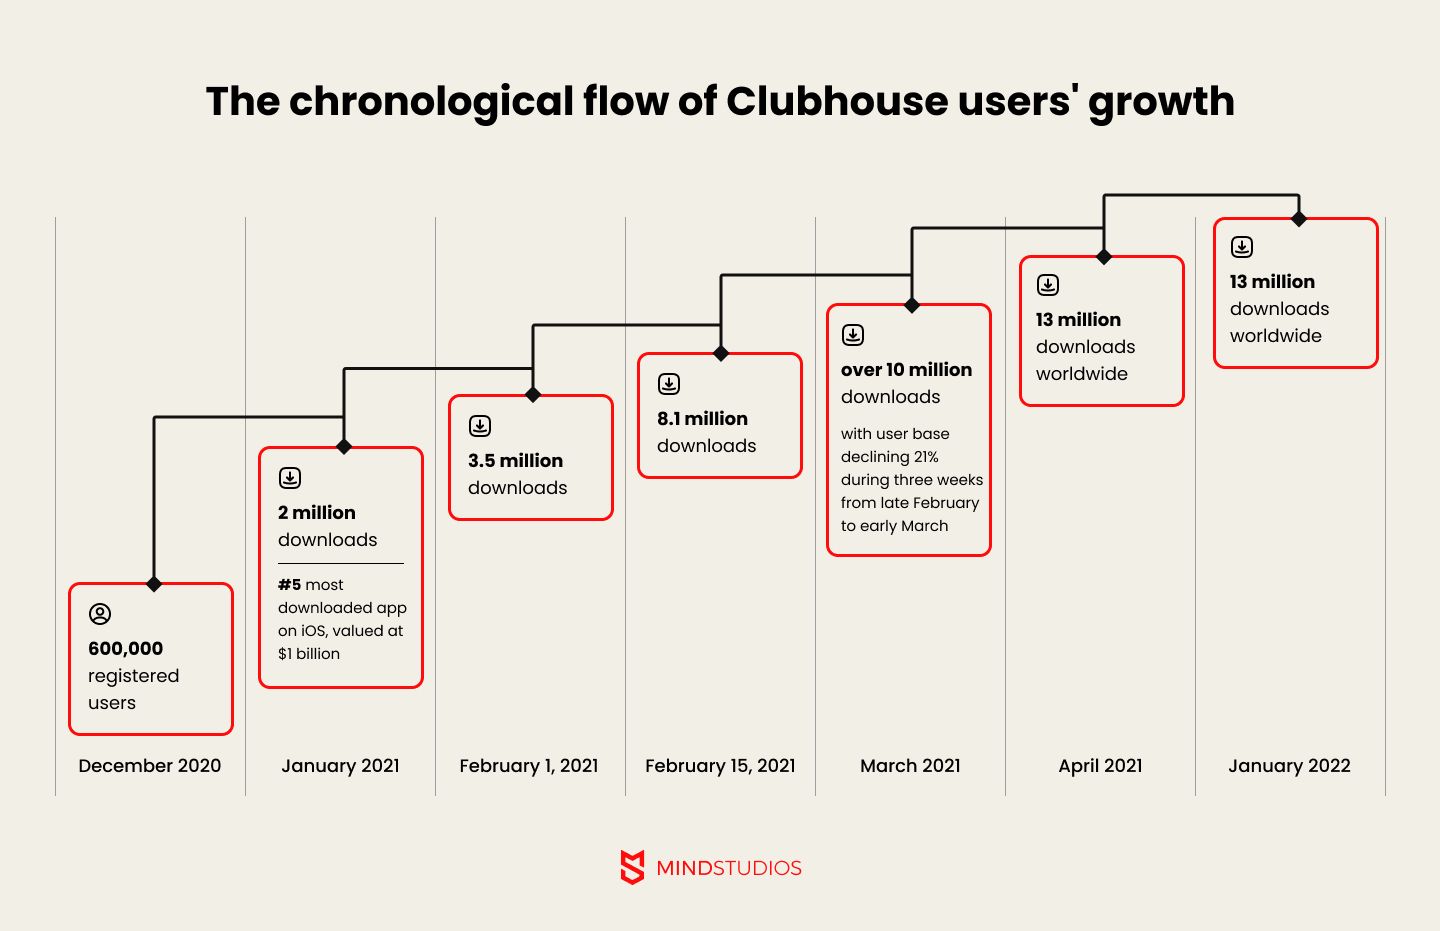 The chronological flow of Clubhouse users' growth